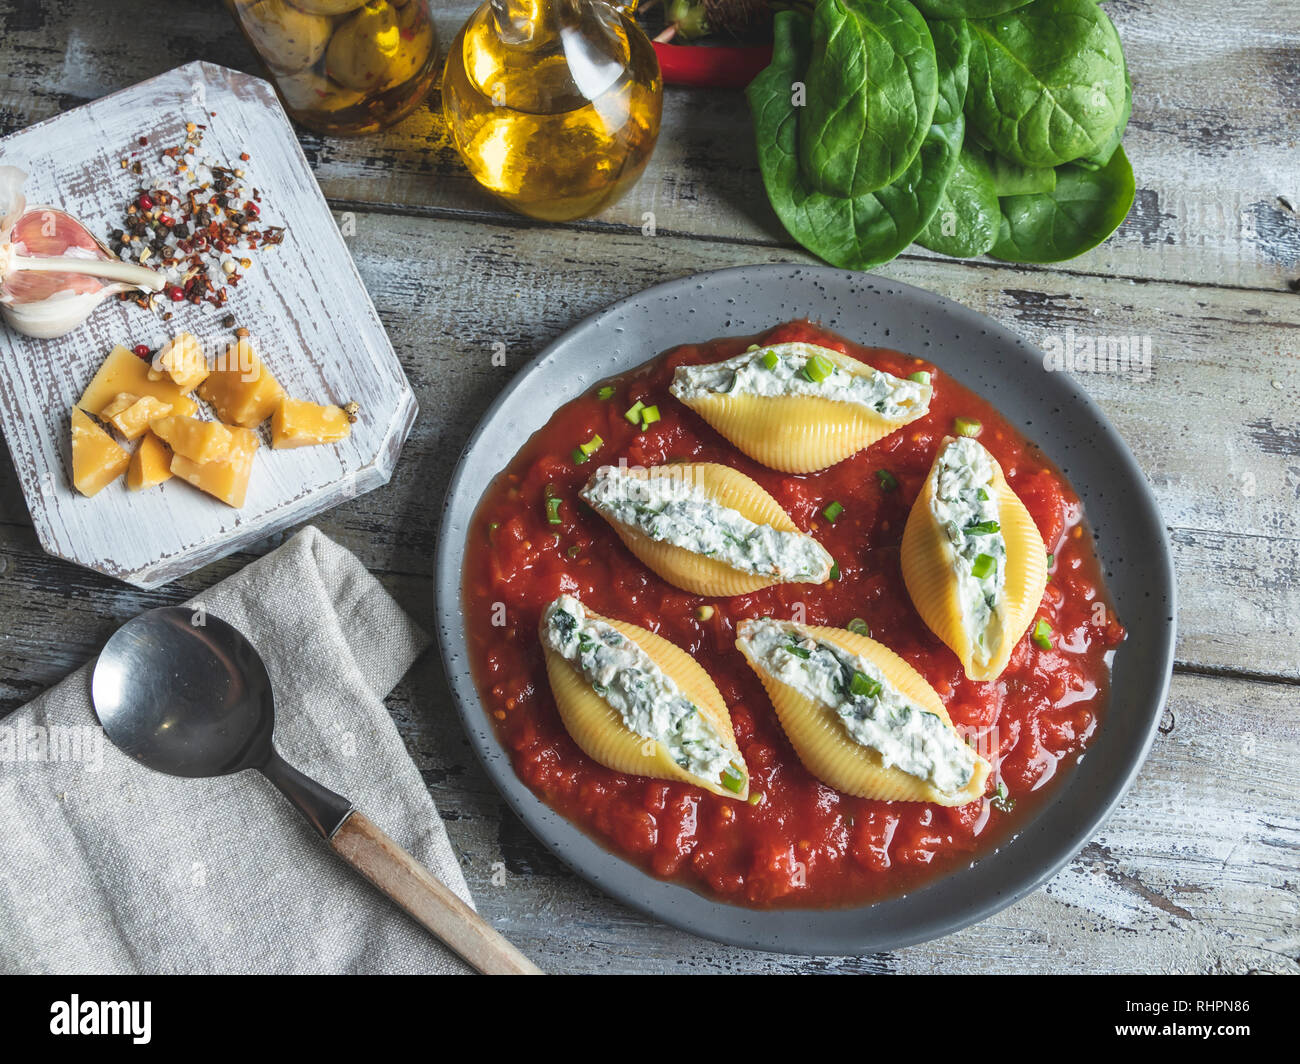 cooked pasta conchiglioni stuffed spinach and cheese, tomato sauce on plate Stock Photo